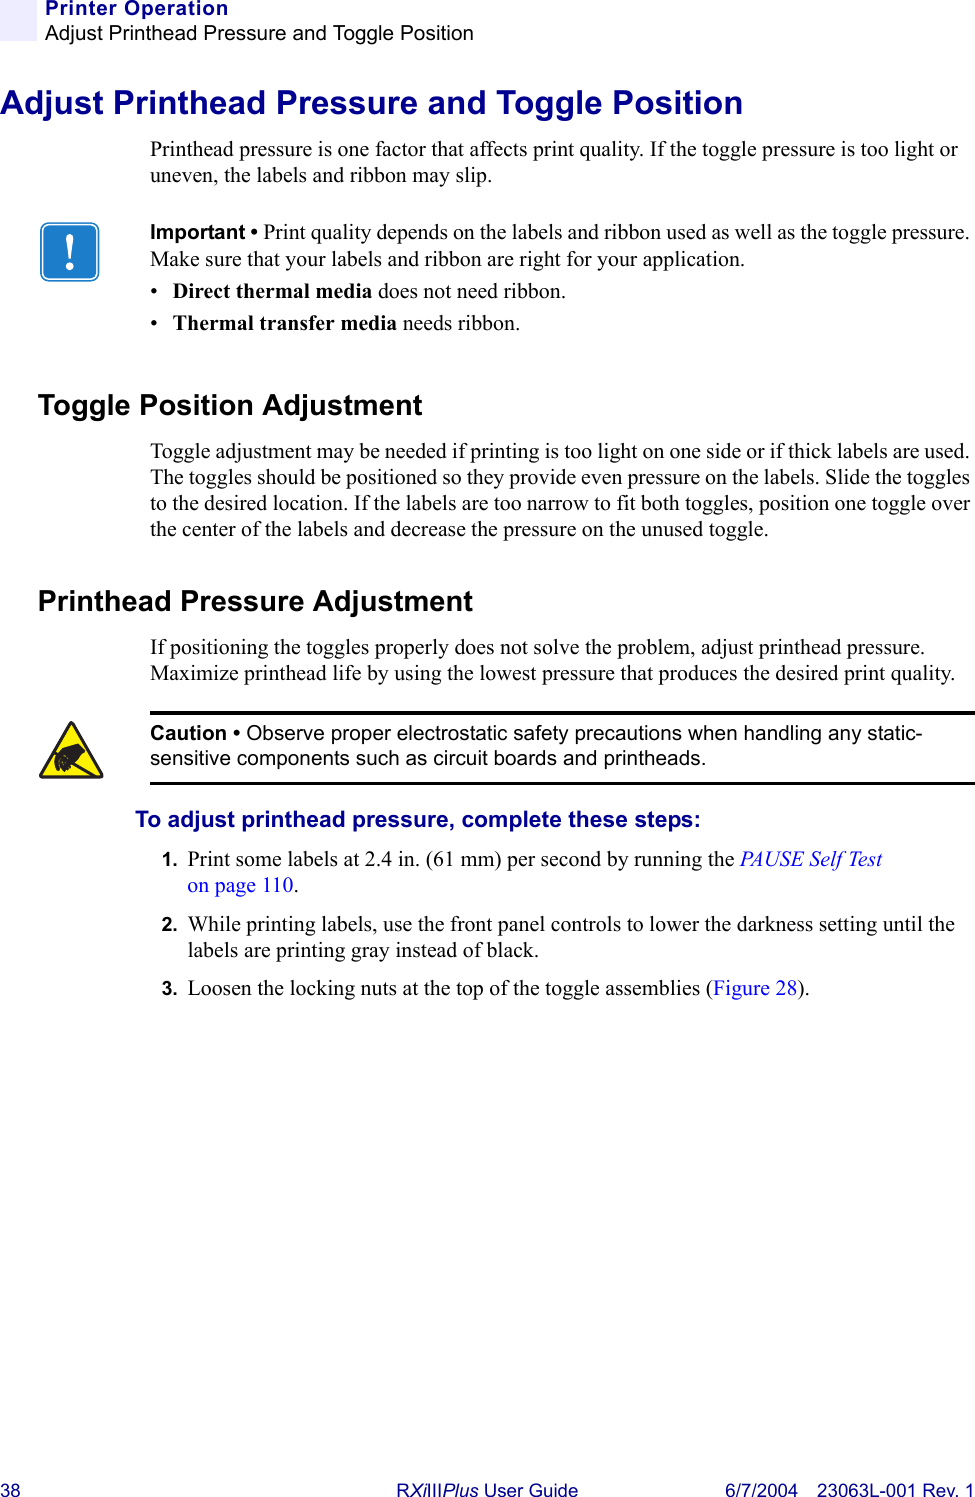 38 RXiIIIPlus User Guide 6/7/2004 23063L-001 Rev. 1Printer OperationAdjust Printhead Pressure and Toggle PositionAdjust Printhead Pressure and Toggle PositionPrinthead pressure is one factor that affects print quality. If the toggle pressure is too light or uneven, the labels and ribbon may slip.Toggle Position AdjustmentToggle adjustment may be needed if printing is too light on one side or if thick labels are used. The toggles should be positioned so they provide even pressure on the labels. Slide the toggles to the desired location. If the labels are too narrow to fit both toggles, position one toggle over the center of the labels and decrease the pressure on the unused toggle.Printhead Pressure AdjustmentIf positioning the toggles properly does not solve the problem, adjust printhead pressure. Maximize printhead life by using the lowest pressure that produces the desired print quality.To adjust printhead pressure, complete these steps:1. Print some labels at 2.4 in. (61 mm) per second by running the PA U S E  S e l f  Tes t  on page 110.2. While printing labels, use the front panel controls to lower the darkness setting until the labels are printing gray instead of black.3. Loosen the locking nuts at the top of the toggle assemblies (Figure 28).Important • Print quality depends on the labels and ribbon used as well as the toggle pressure. Make sure that your labels and ribbon are right for your application. •Direct thermal media does not need ribbon.•Thermal transfer media needs ribbon.Caution • Observe proper electrostatic safety precautions when handling any static-sensitive components such as circuit boards and printheads.